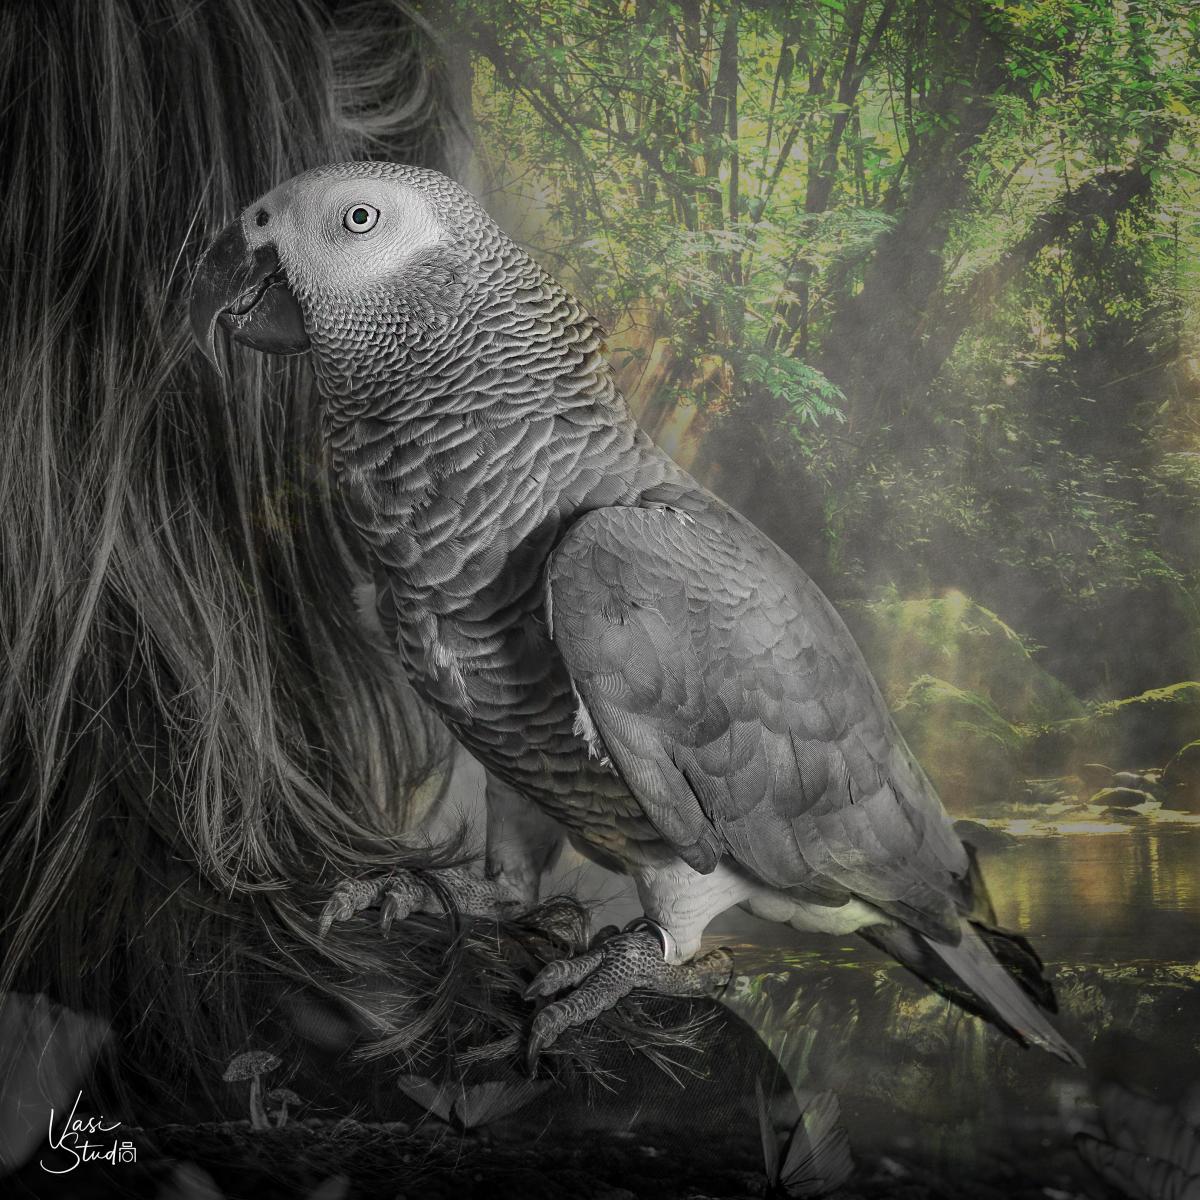 Parrot Bird Creative Art Piece. You can send us your photo and create a wall art piece for your home.